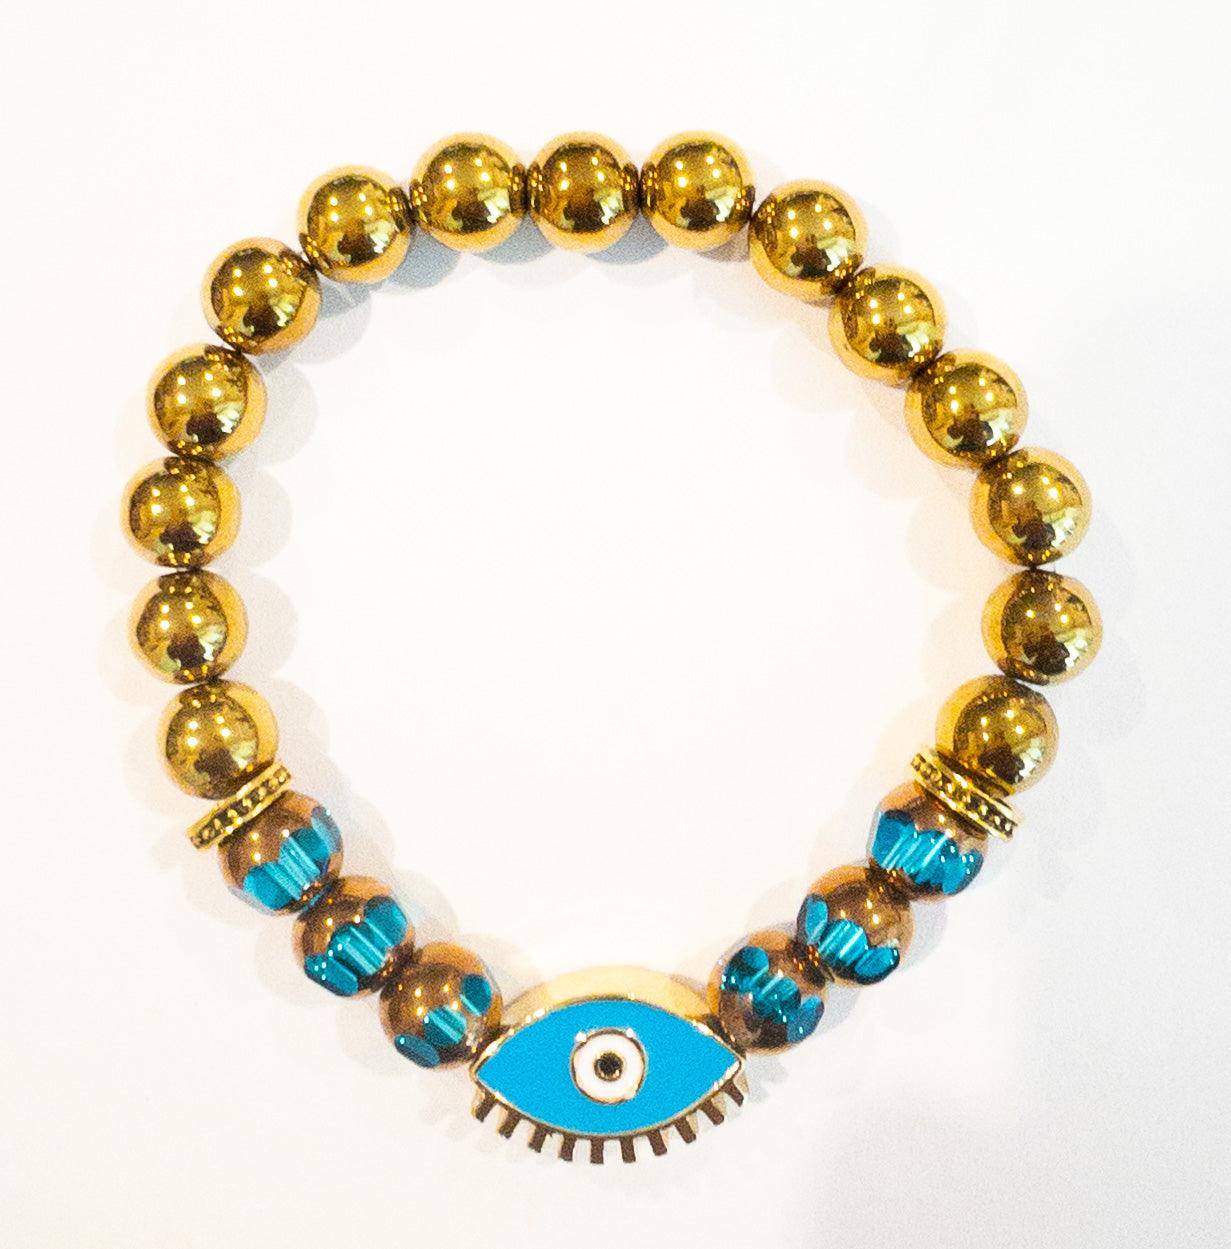 Evil Eye Bead Bracelet Turquoise, Gold spacers and Gold Beads - Brent's Bling